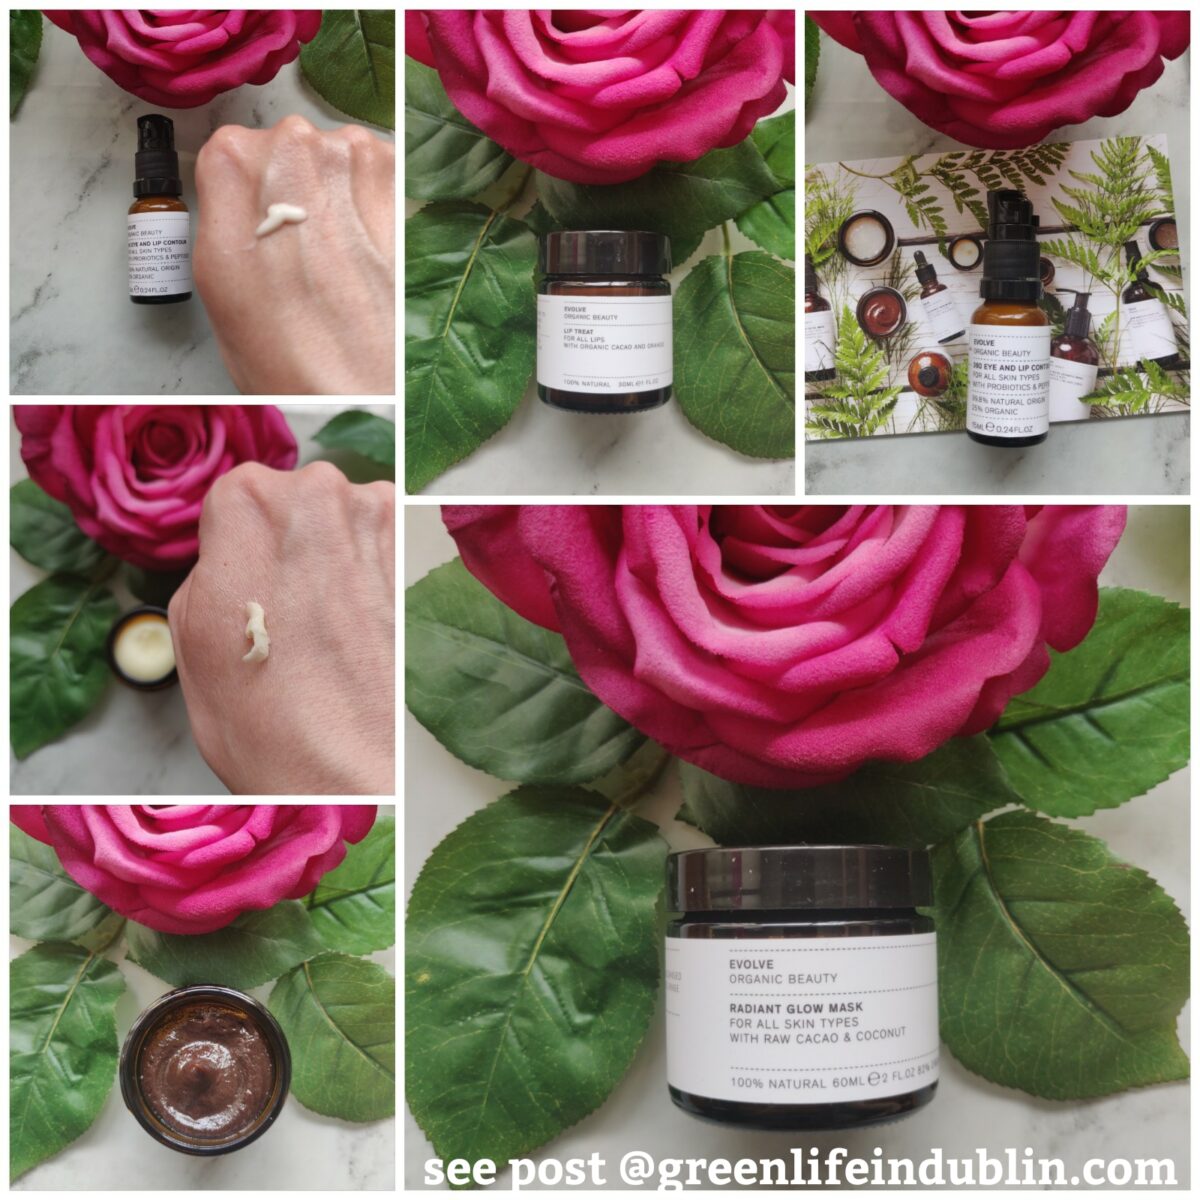 Testing Evolve Organic Beauty 360 Eye and Lip Contour & More [AD]